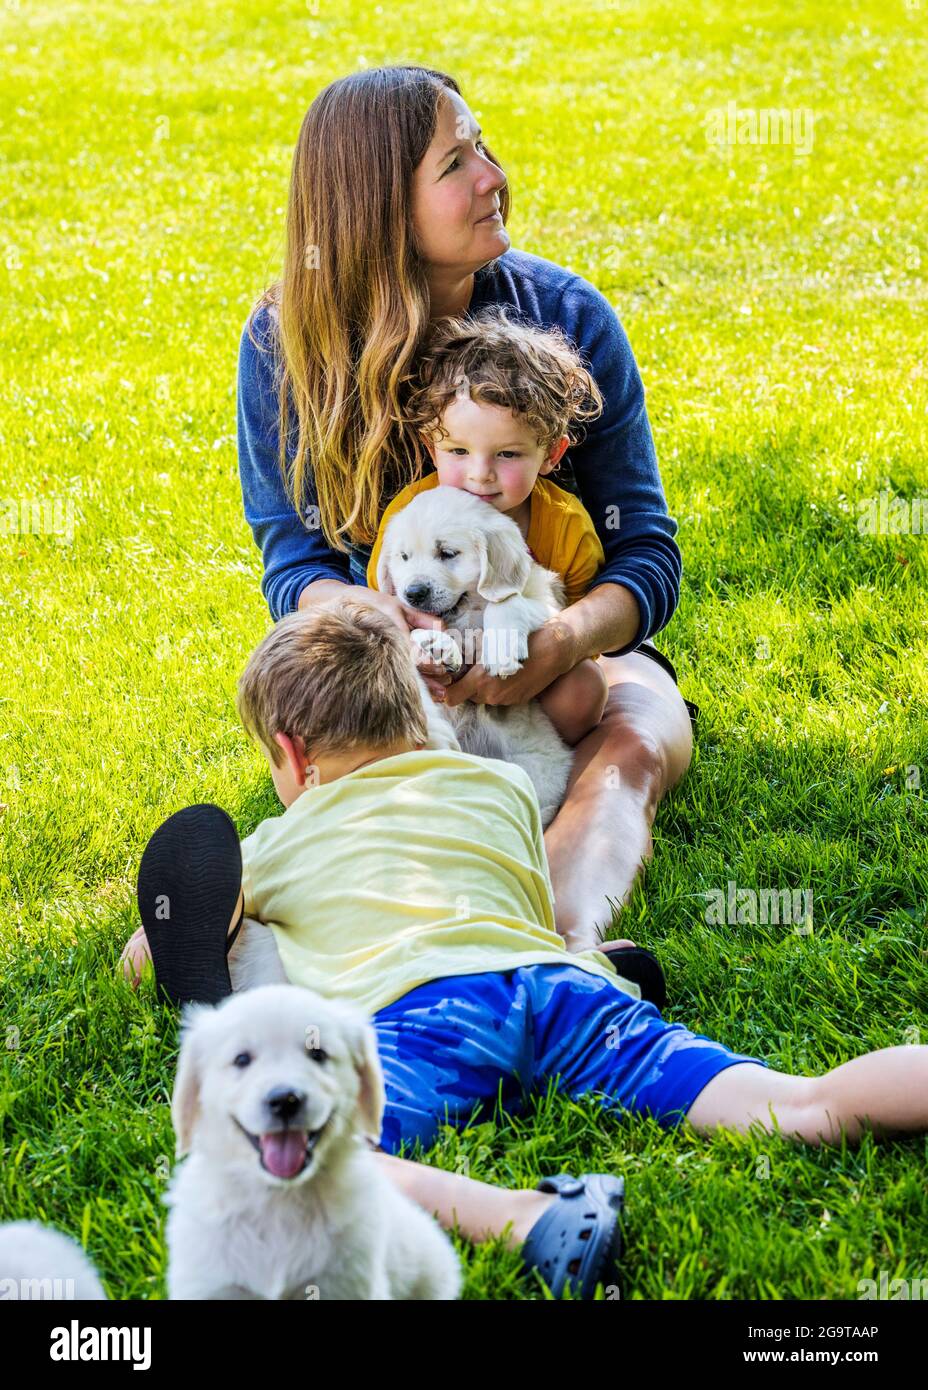 Mother and young children playing on grass with six week old Platinum, or Cream colored Golden Retriever puppies. Stock Photo